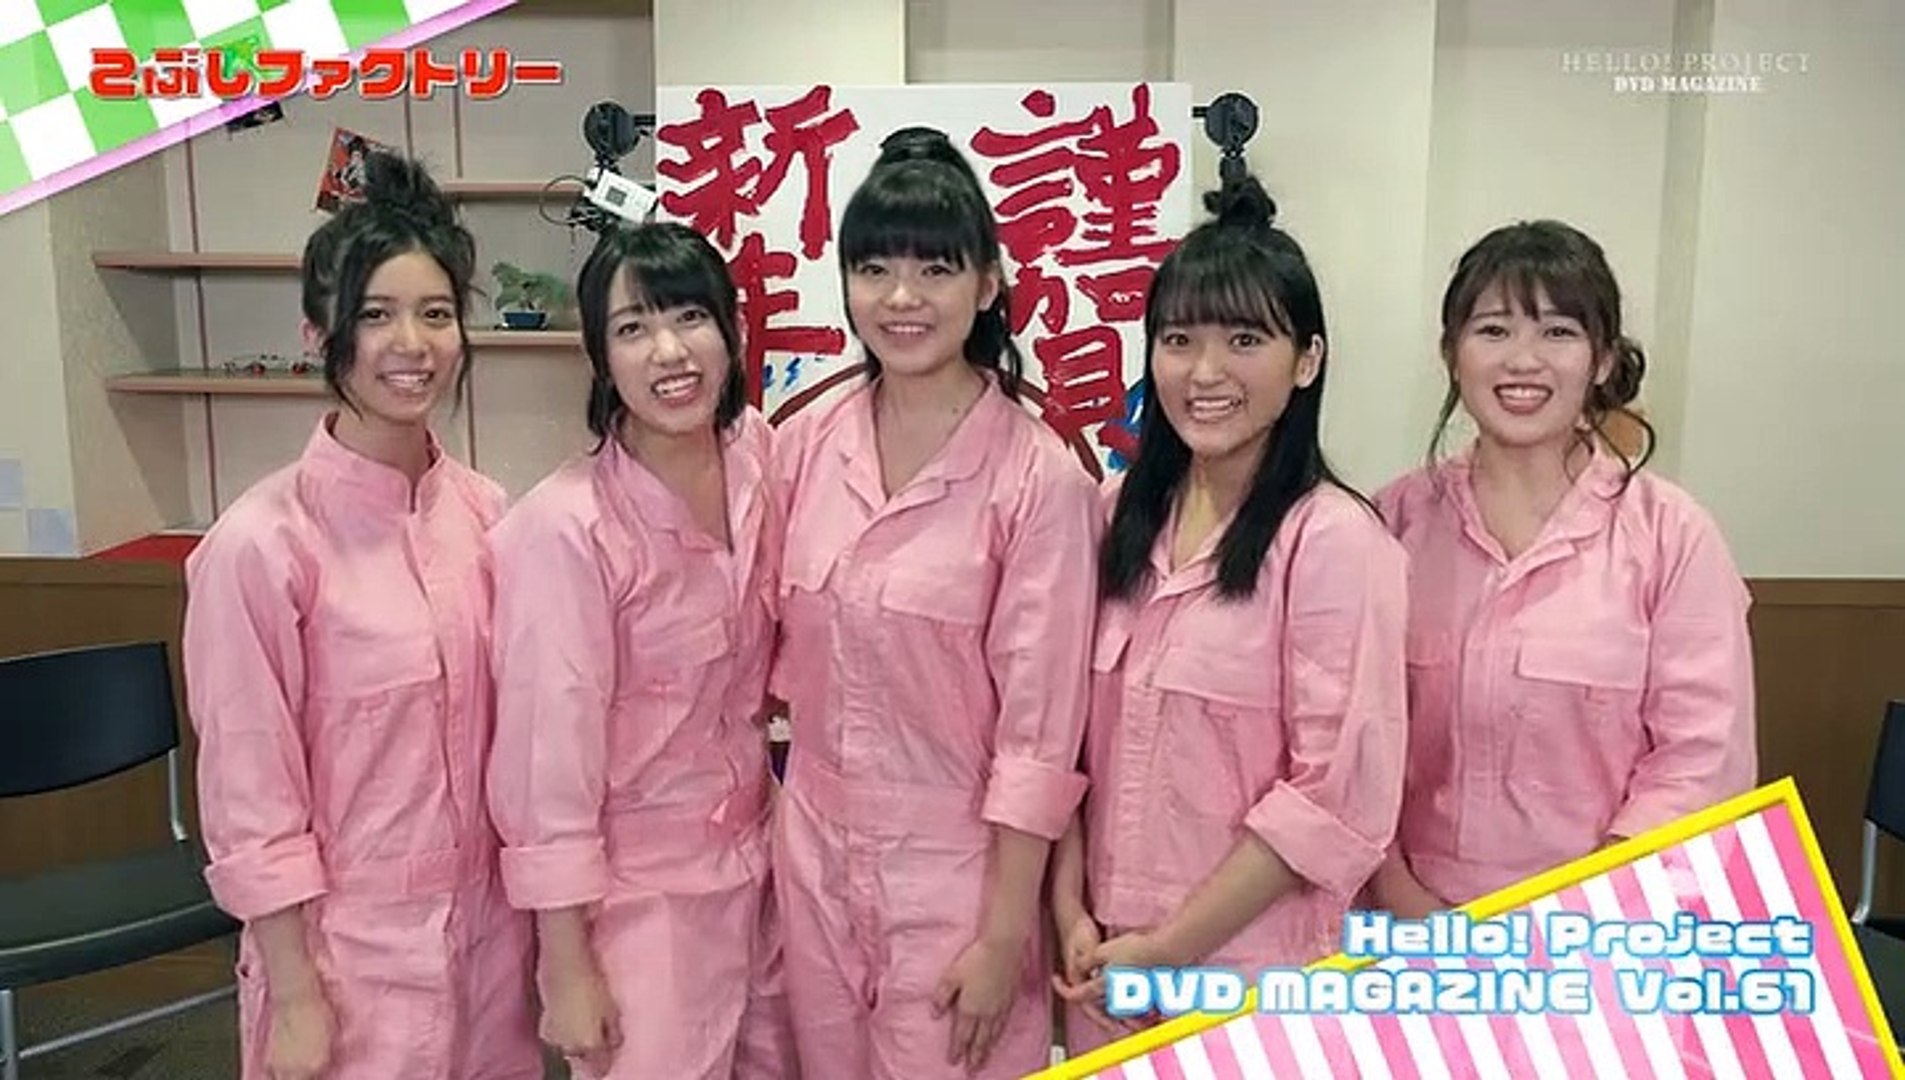 Hello Project Dvd Magazine Vol 61 Disc1 19 01 02 Part 2 Video Dailymotion